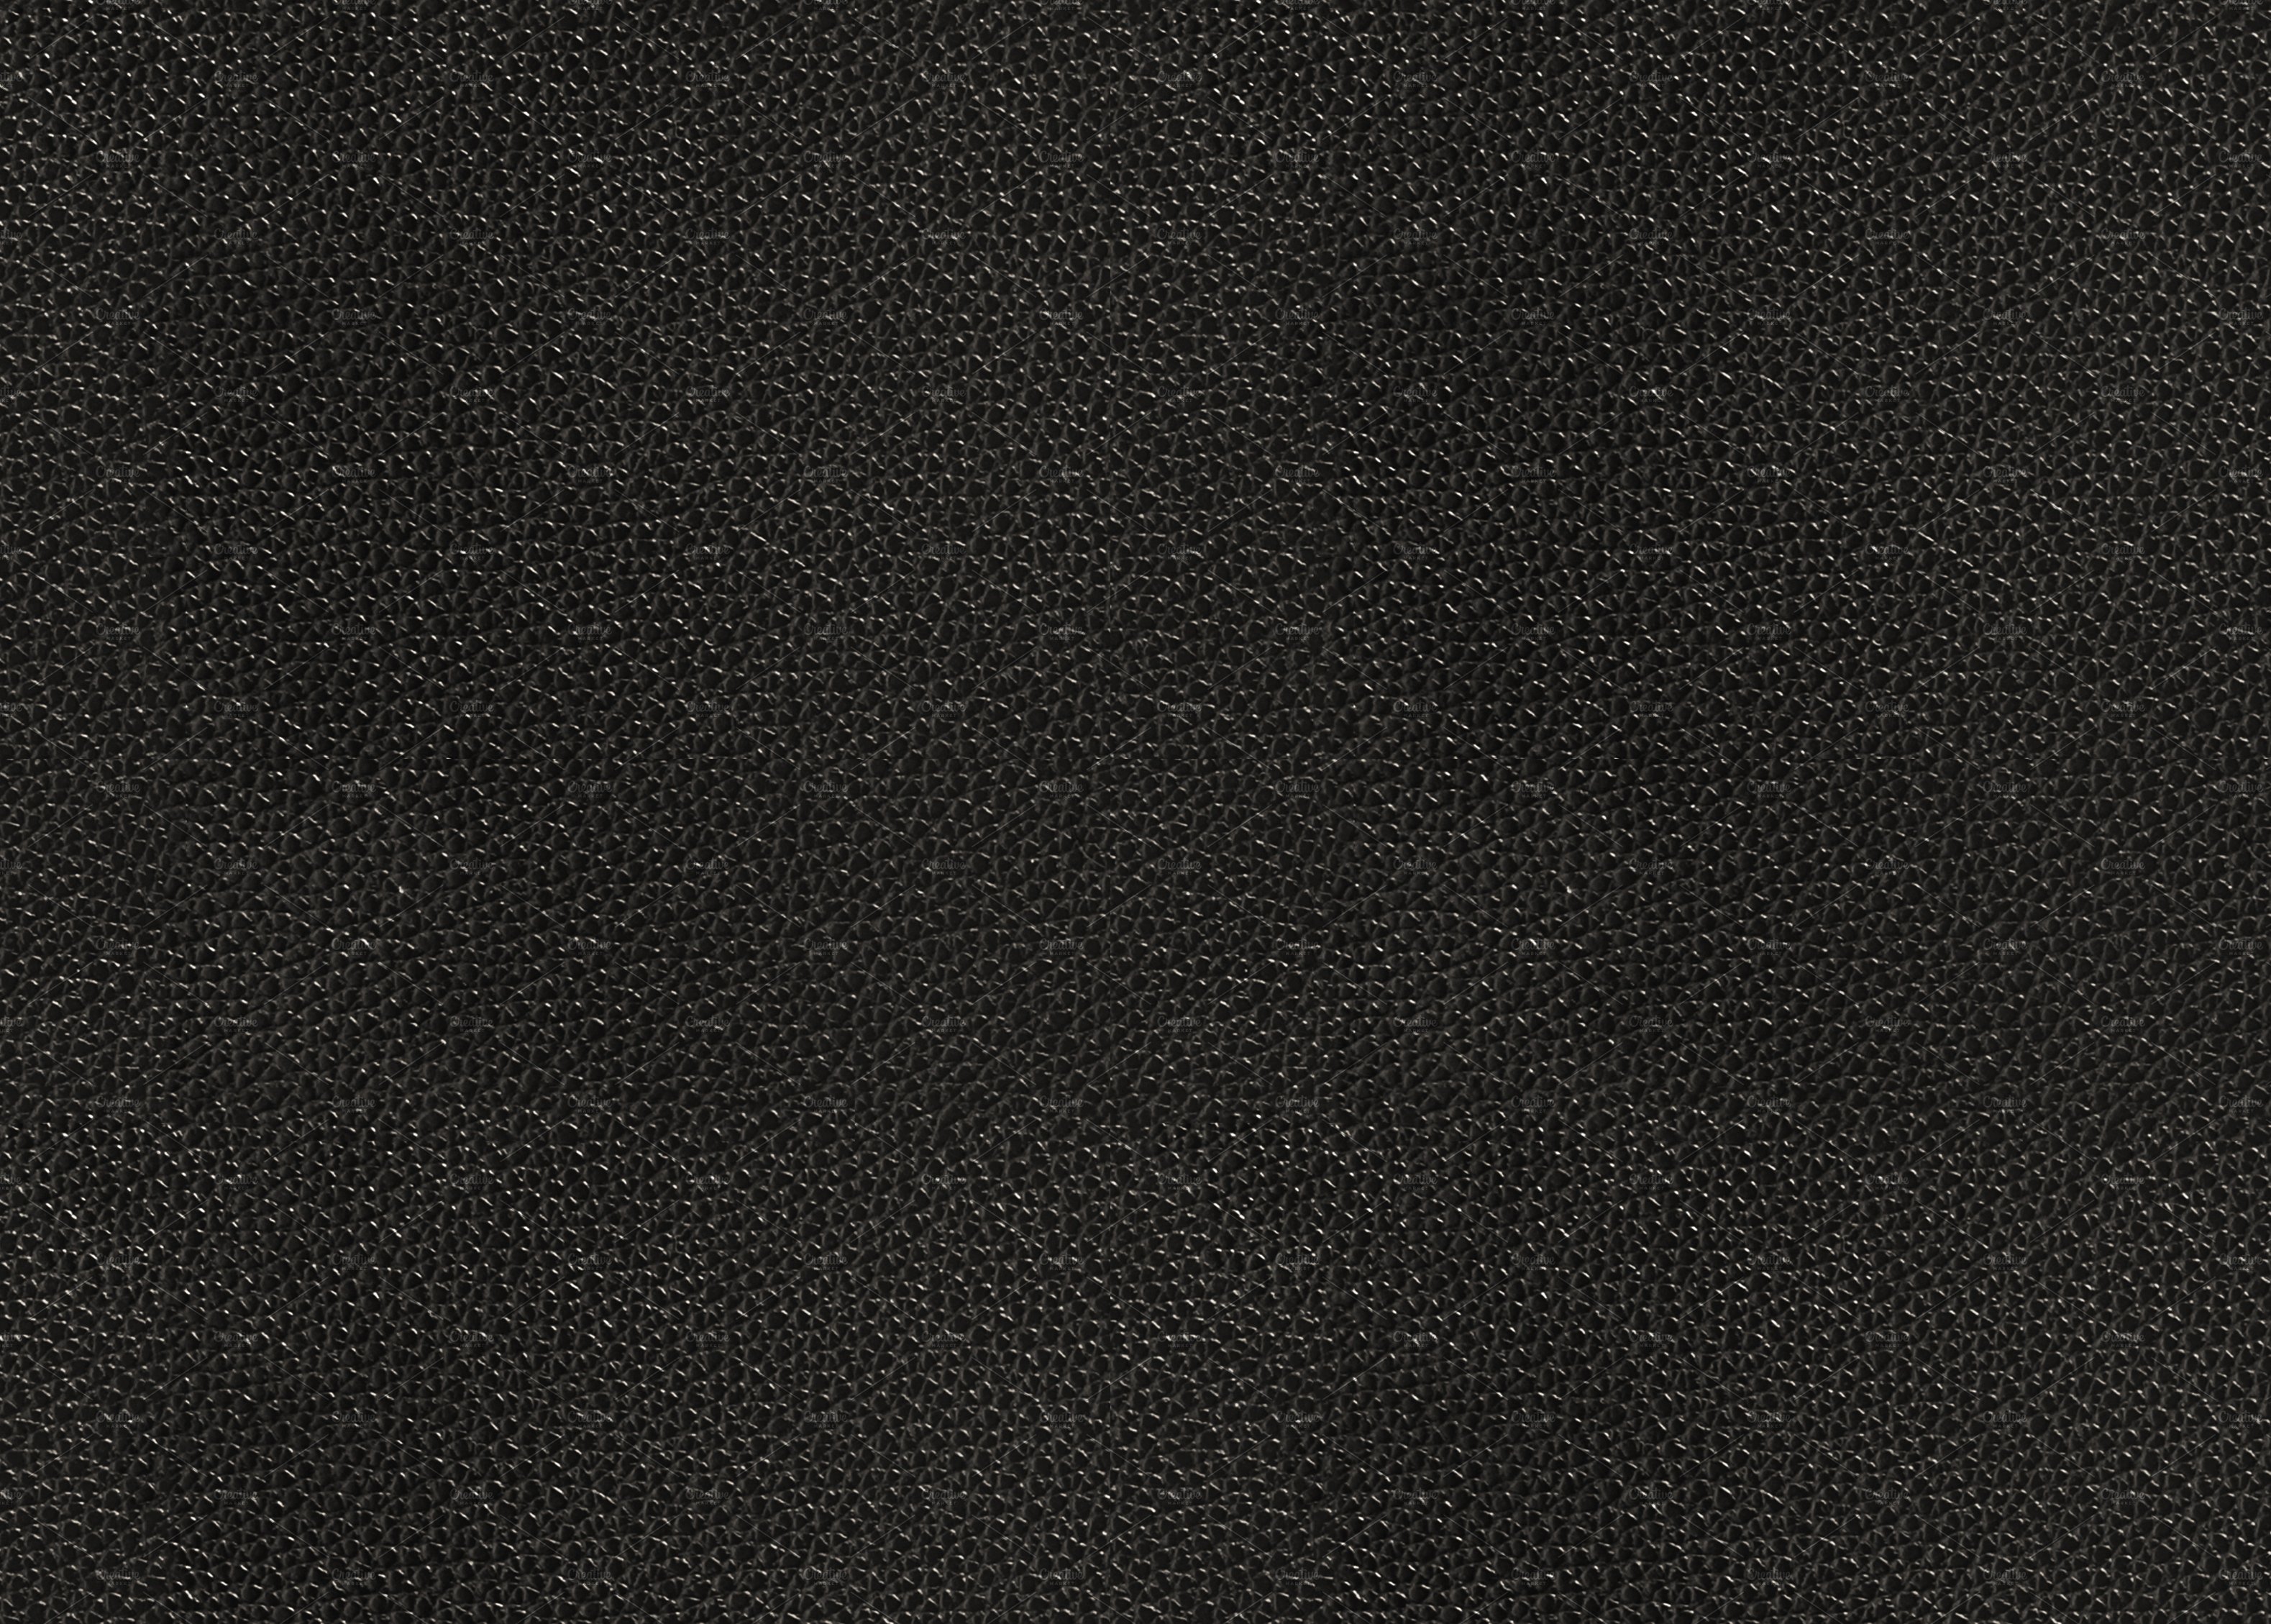 Set of 5 Leather Texures cover image.